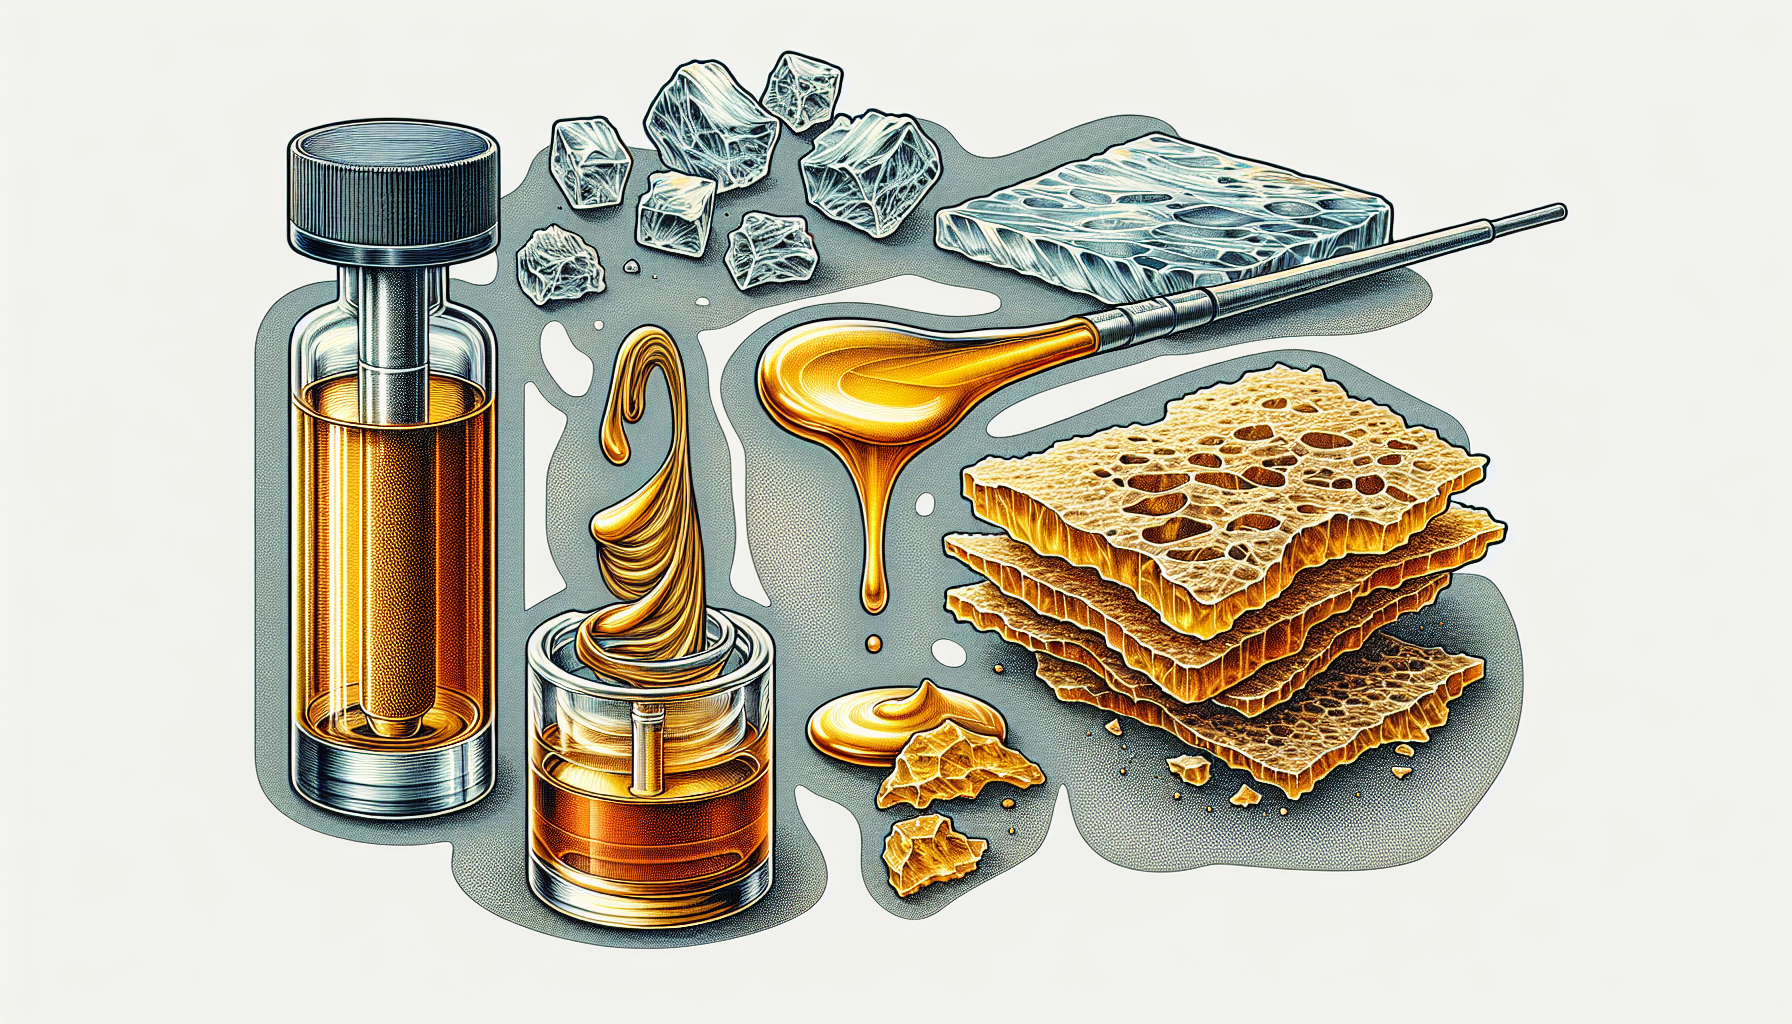 Illustration of various forms of hash including BHO, dabs, shatter, and wax